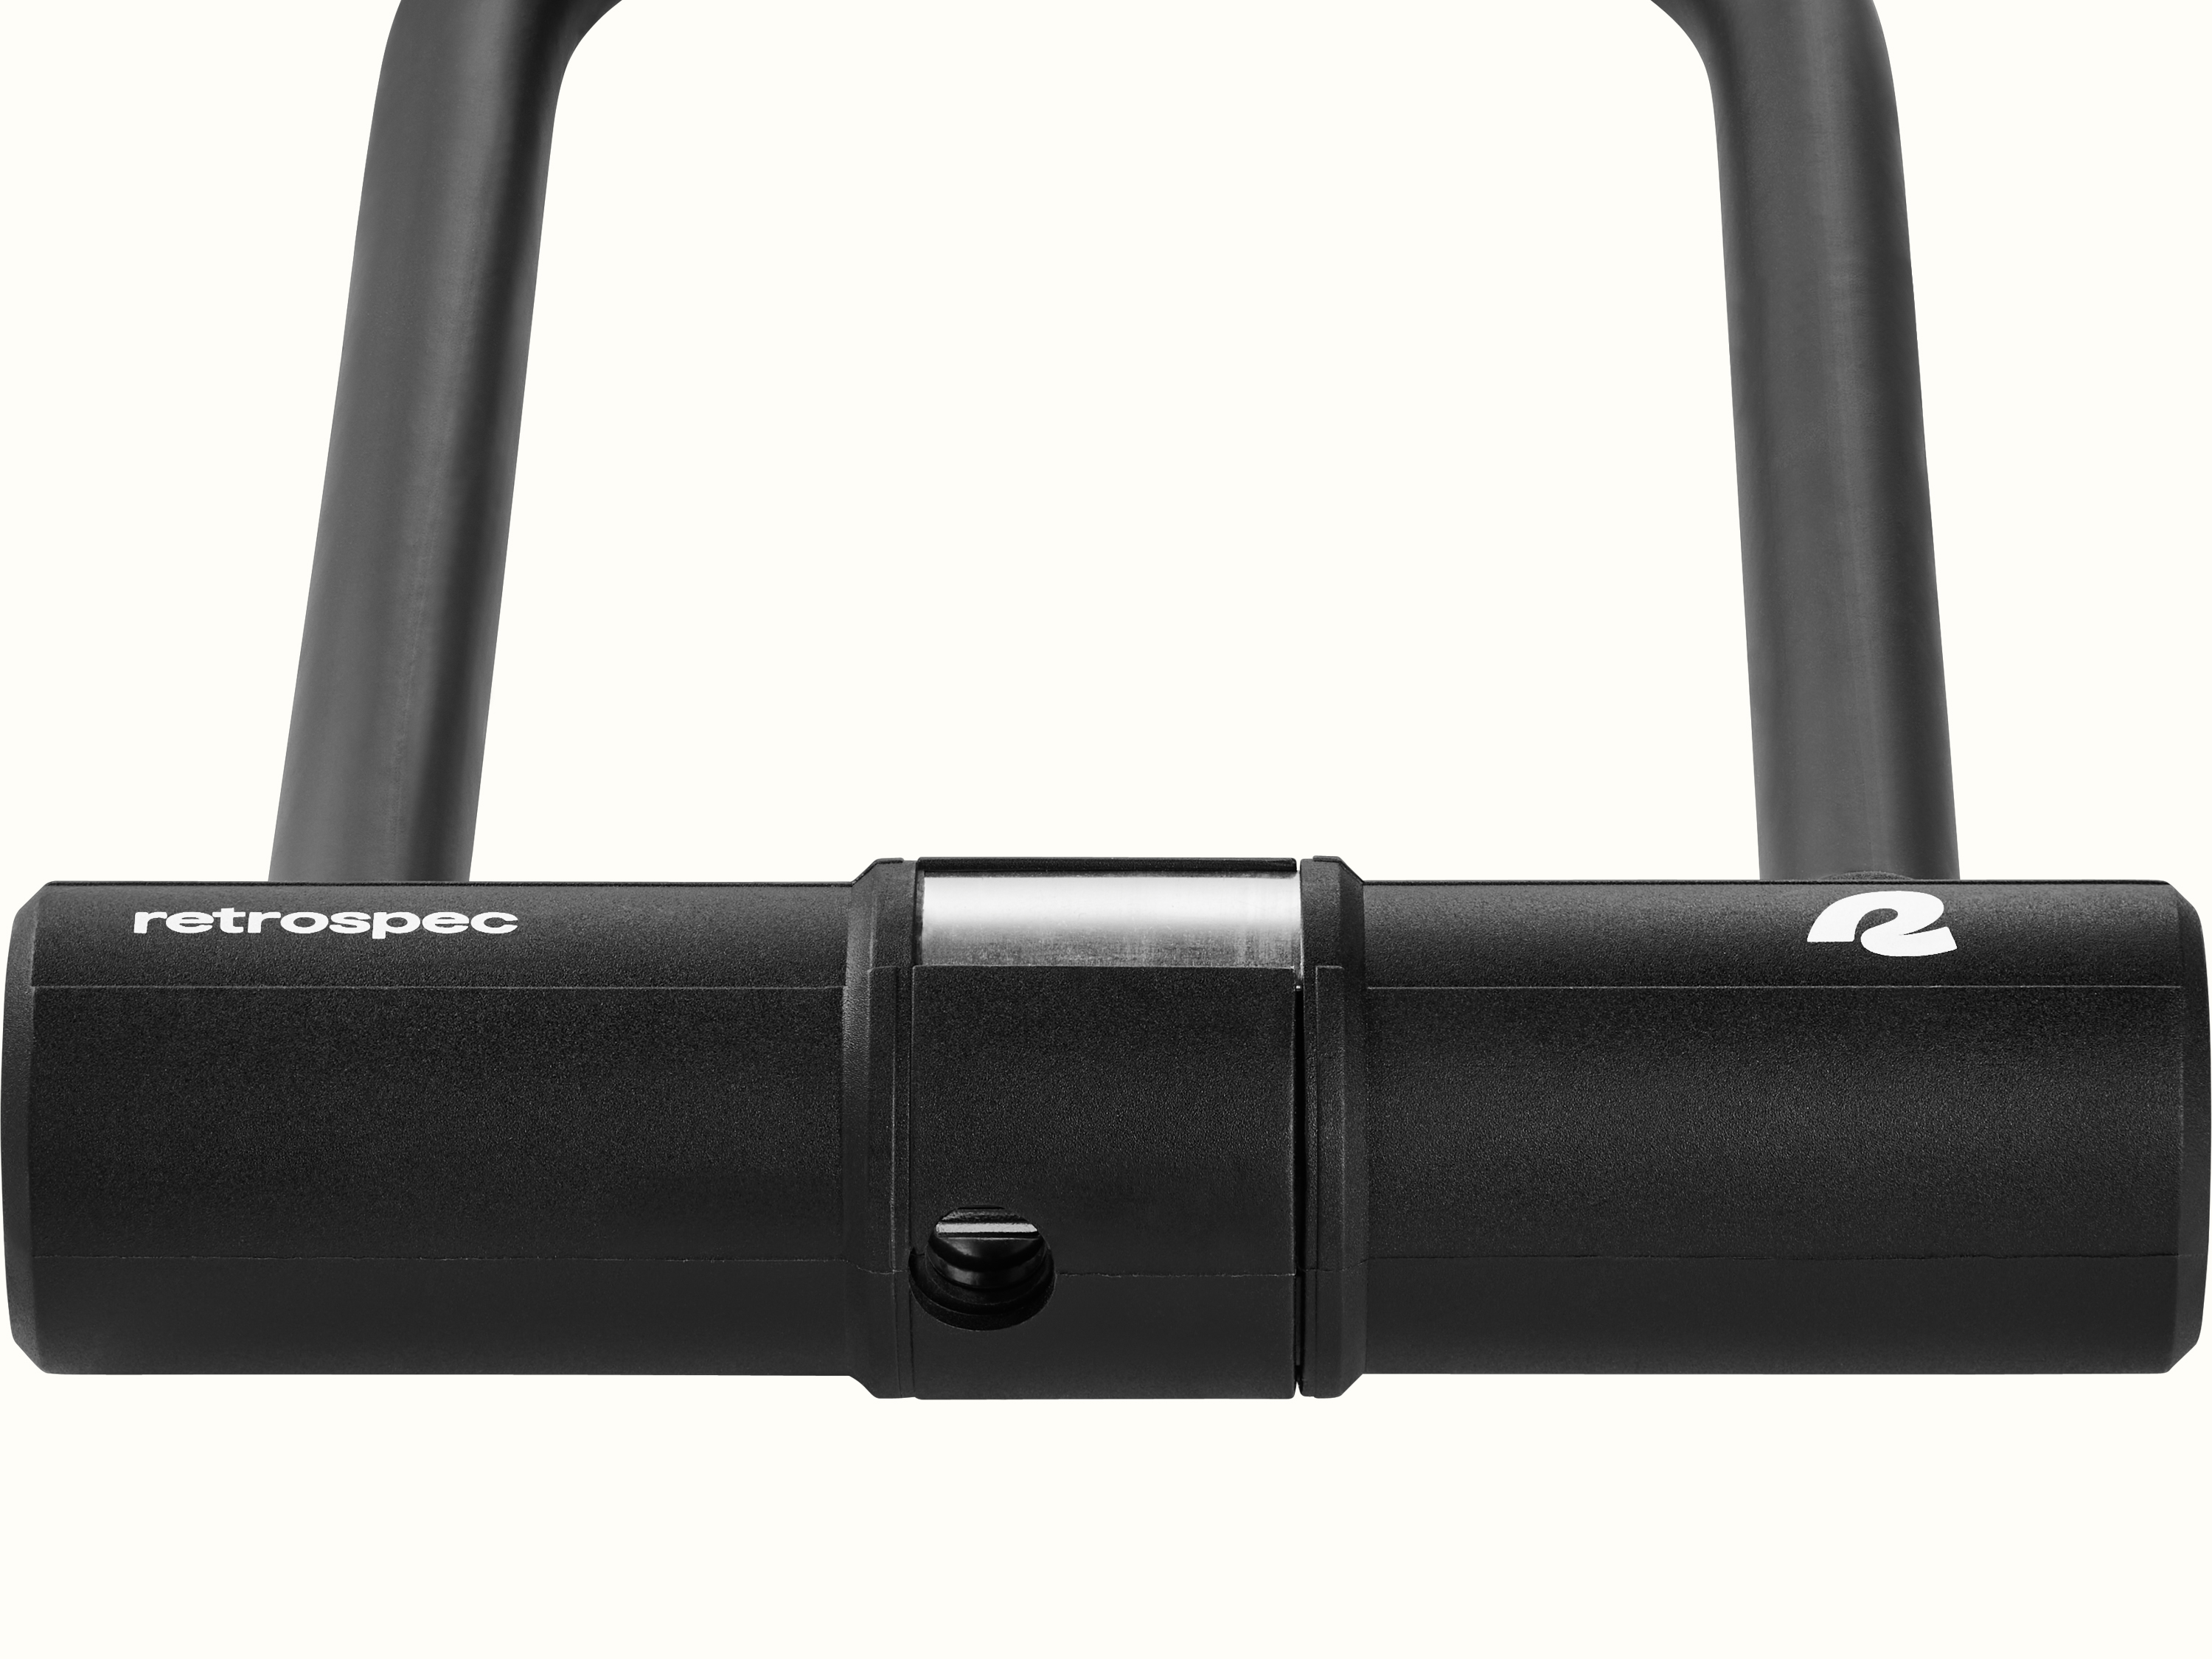 Grizzly Integrated Combo Cable Bike Lock - 8mm